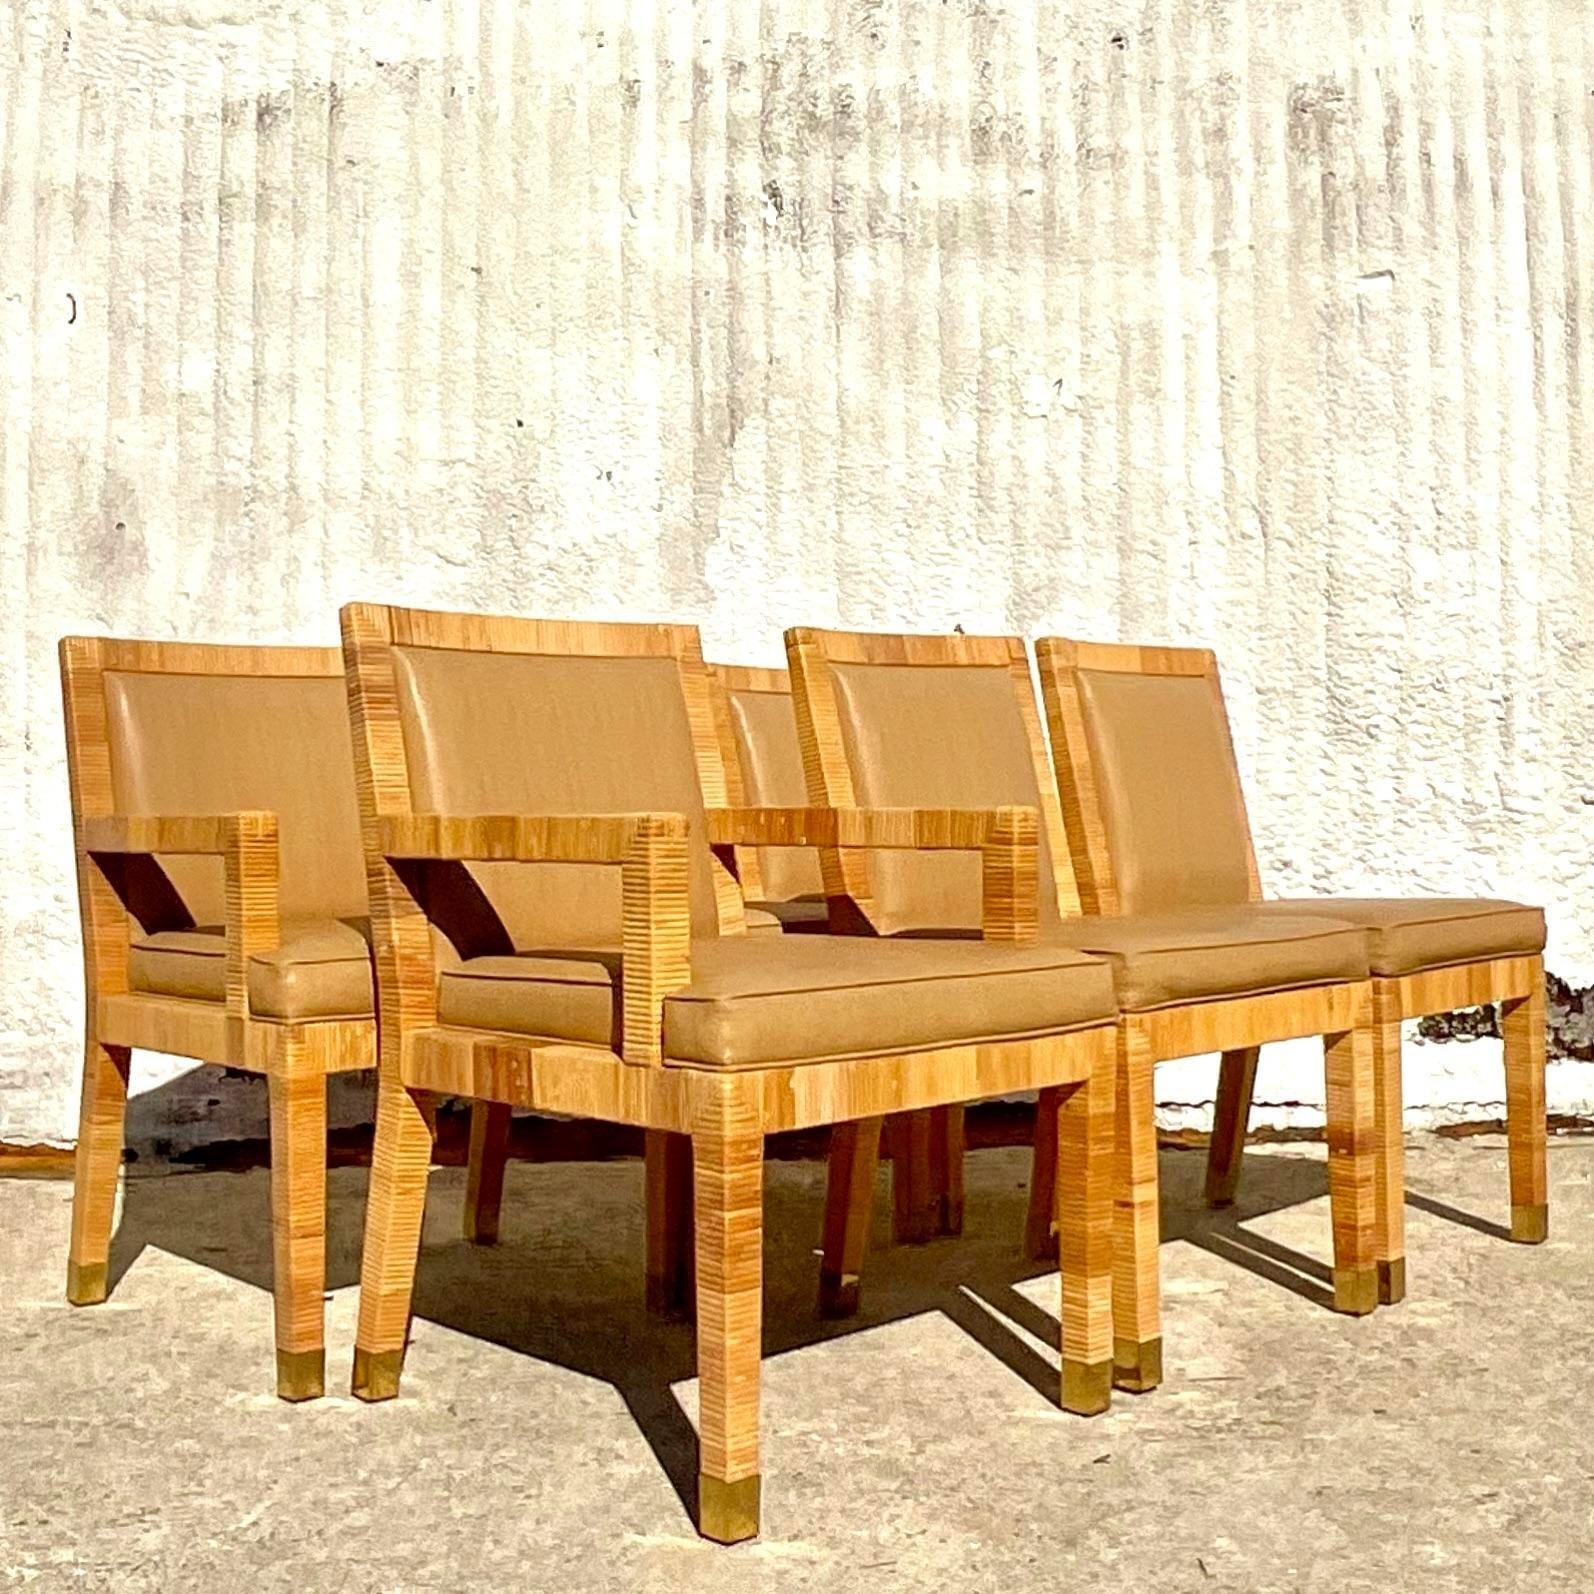 A spectacular set of vintage Coastal dining chairs. Made by the iconic Bielecky Brothers and tagged twice on the bottom. Chic wrapped rattan with brass caps on each legs. Faux leather seats in a tonal lizard design. Acquired from a Palm Beach